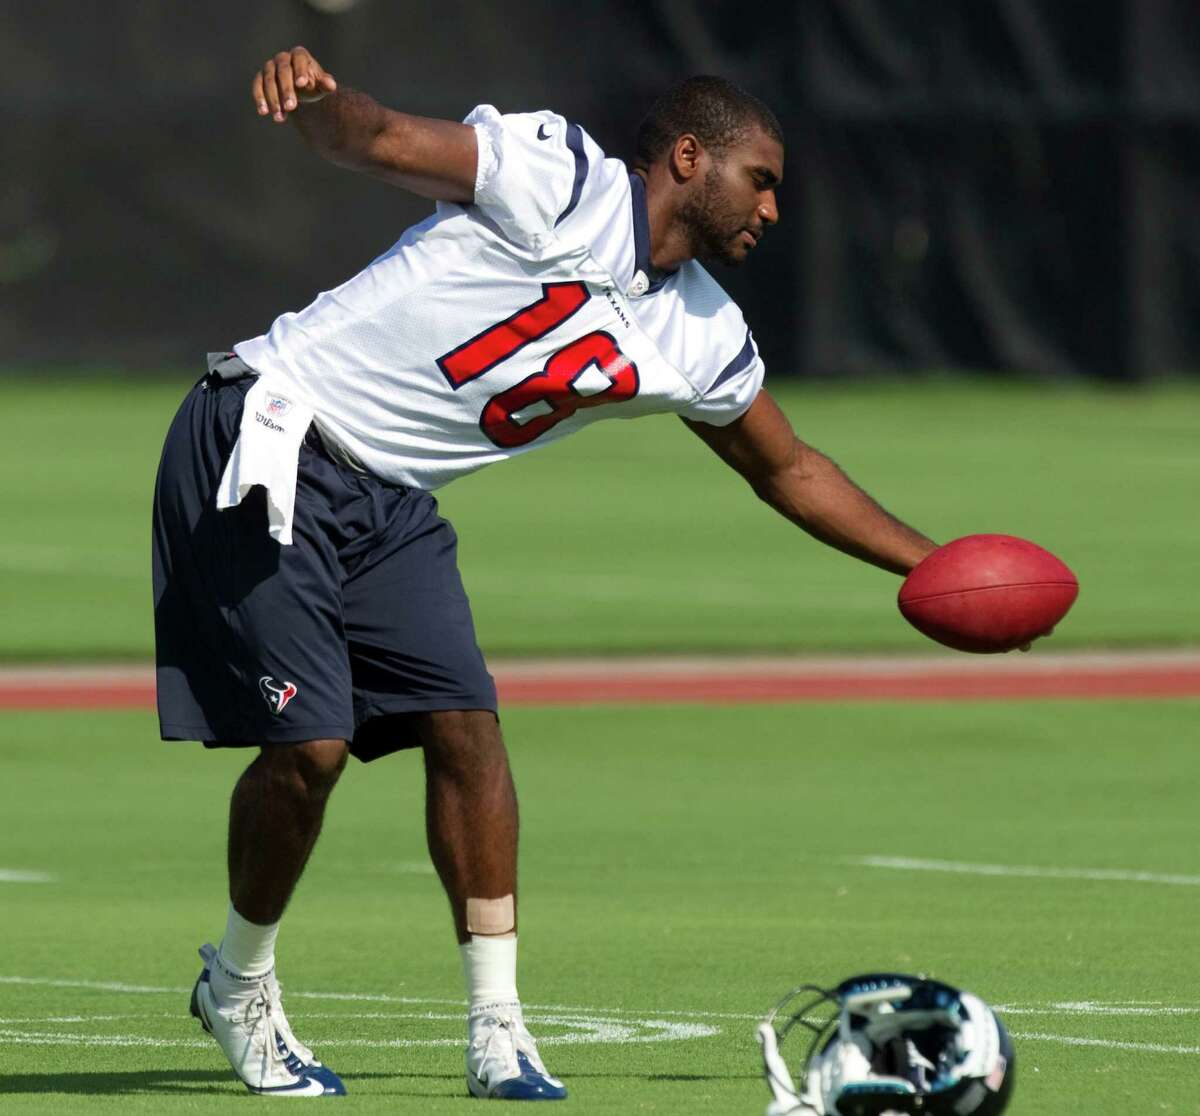 Houston Texans wide receiver Lestar Jean reaches out to catch a ball during Texans mini camp at the Methodist Training Center Thursday, June 14, 2012, in Houston.